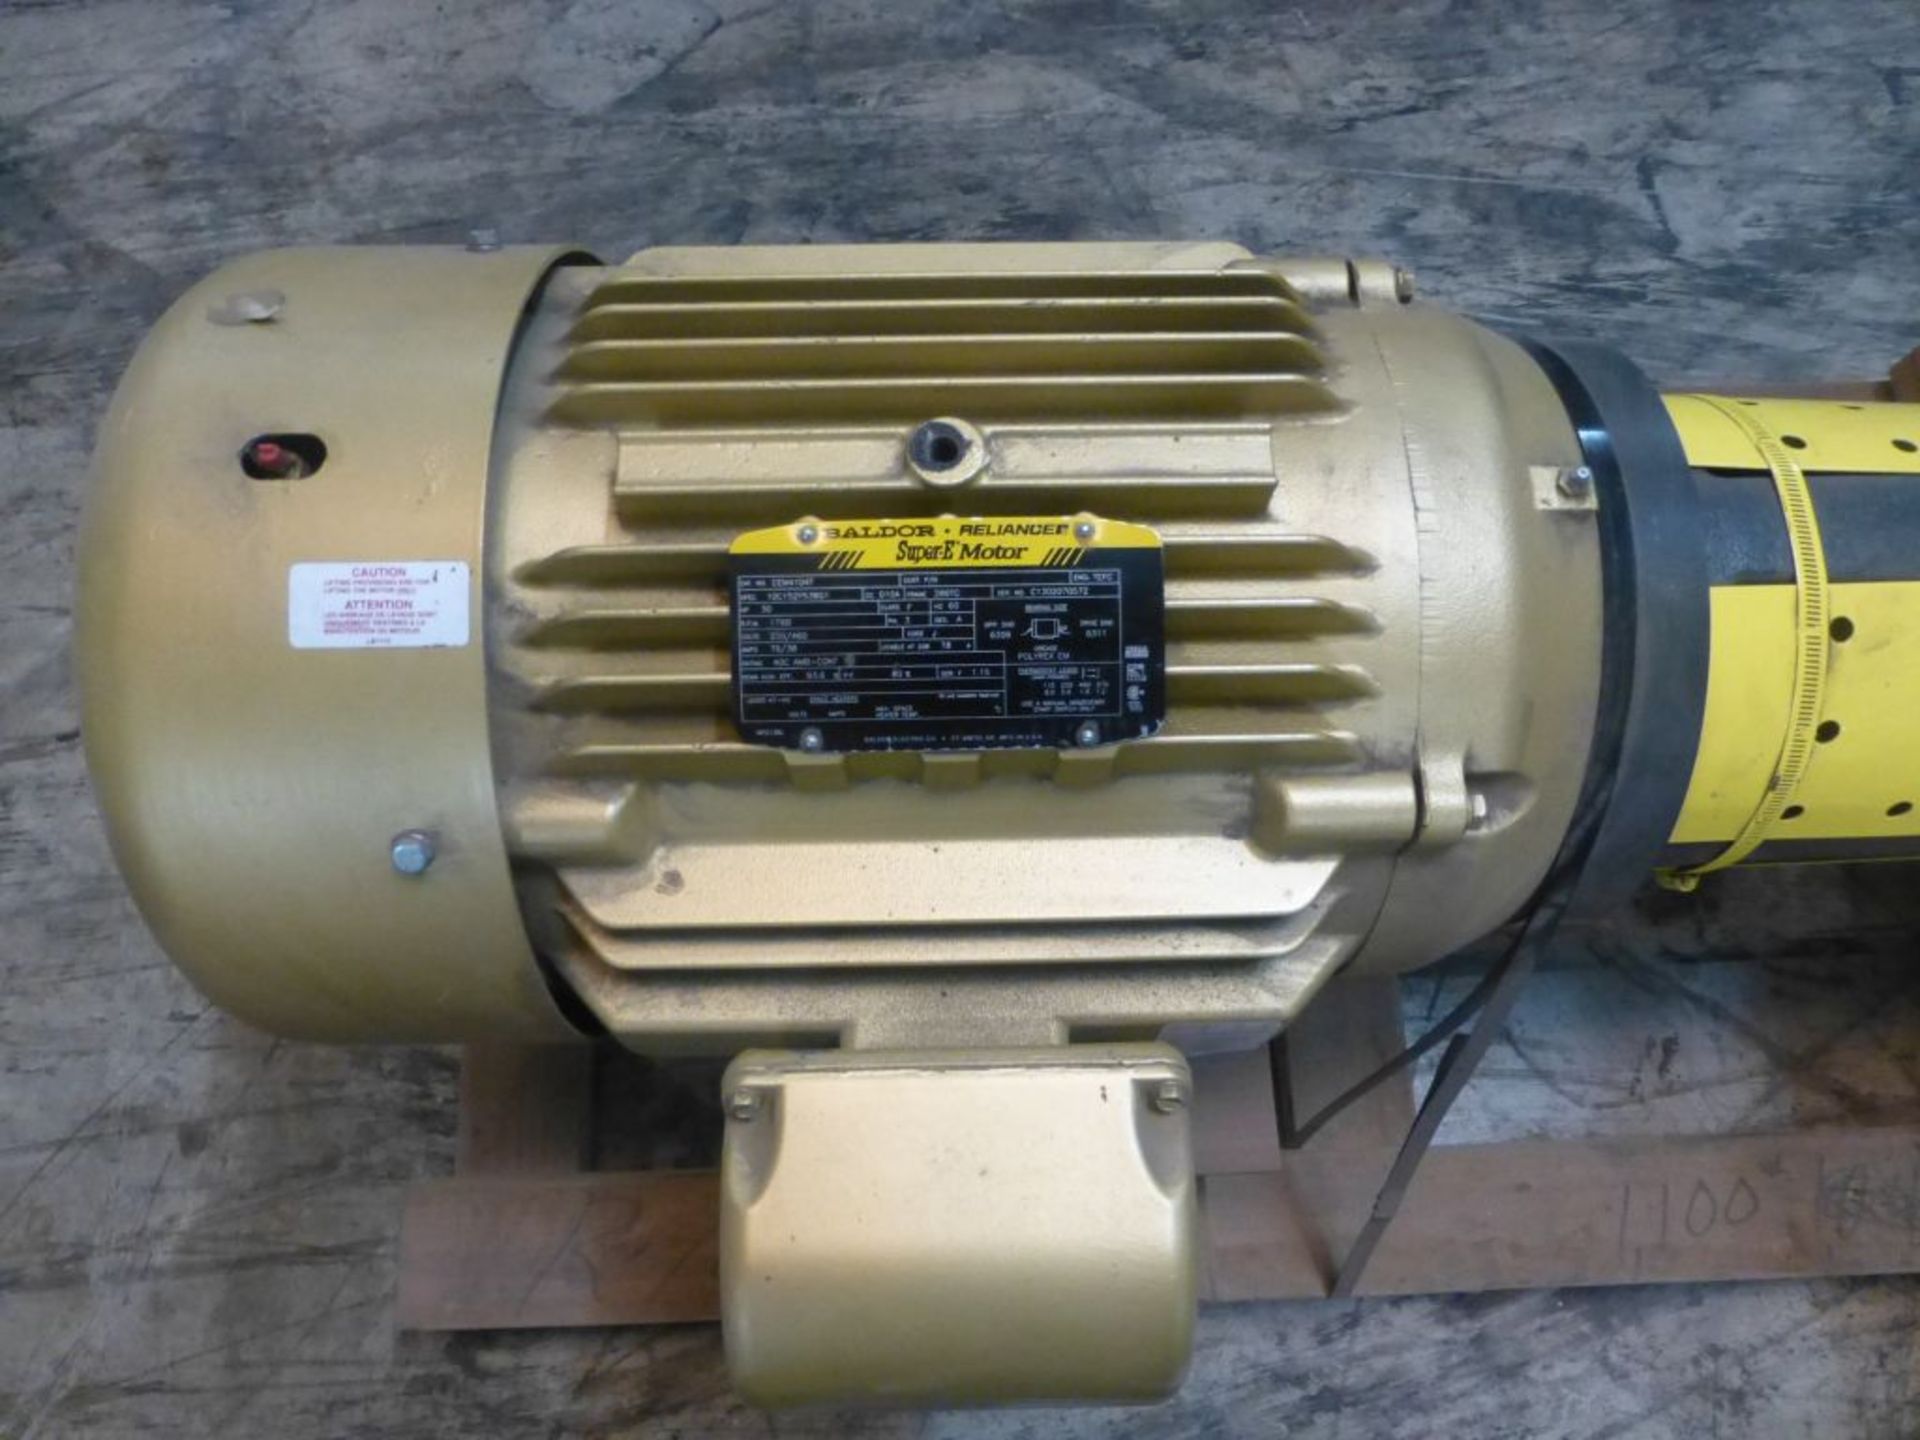 Gusher Pump w/Motor|Part No. Z223536; 30 HP; 230/460V; 1750 RPM - Image 11 of 12